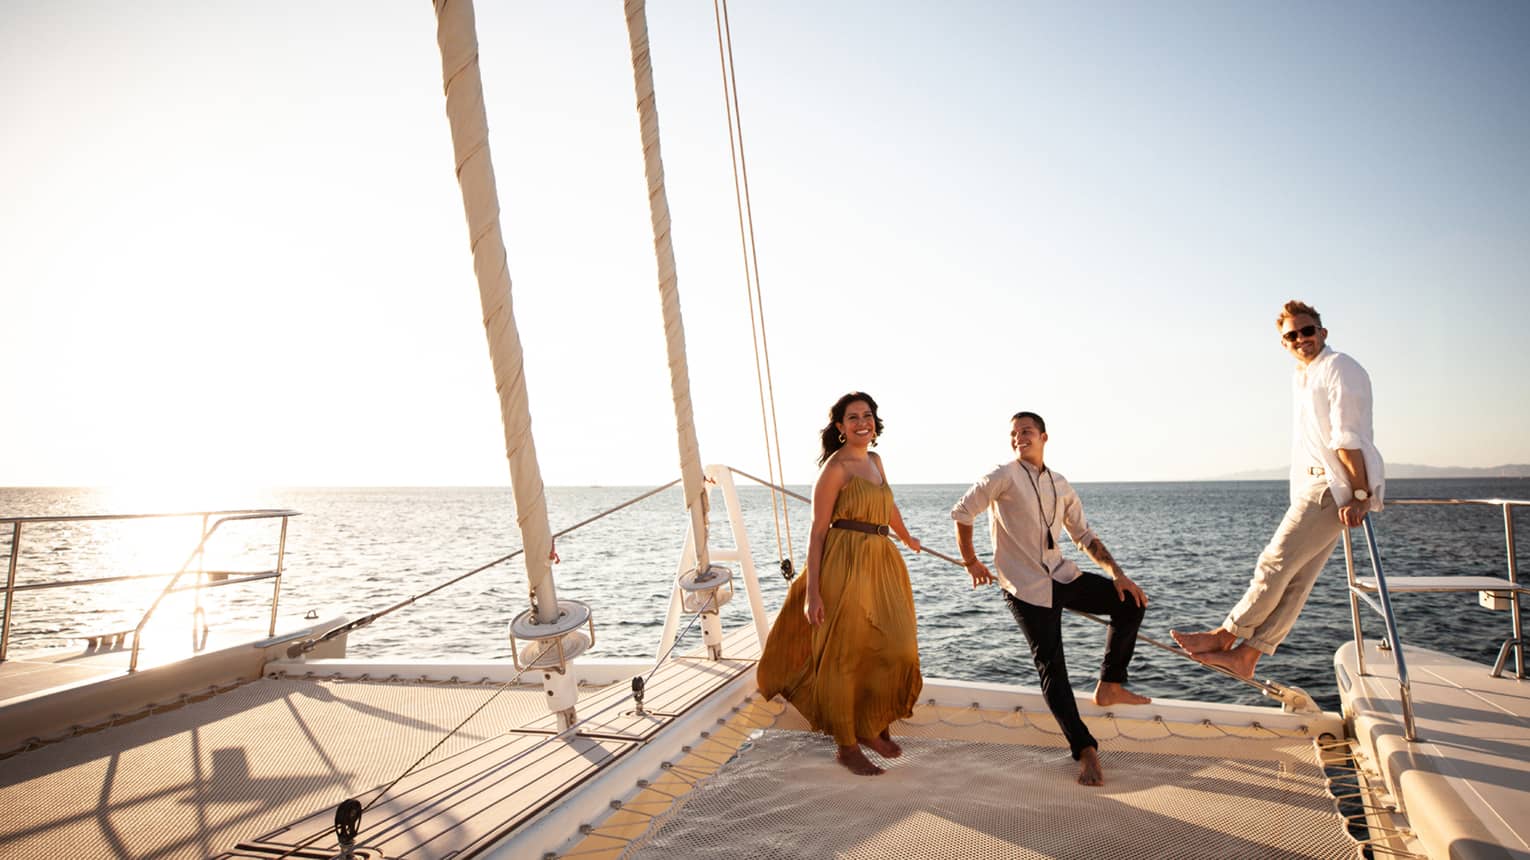 A woman wearing a flowing yellow dress, a man wearing a white shirt and black pants and another man wearing a white shirt and khaki pants stand on the back of a sailboat smiling and looking out onto the ocean